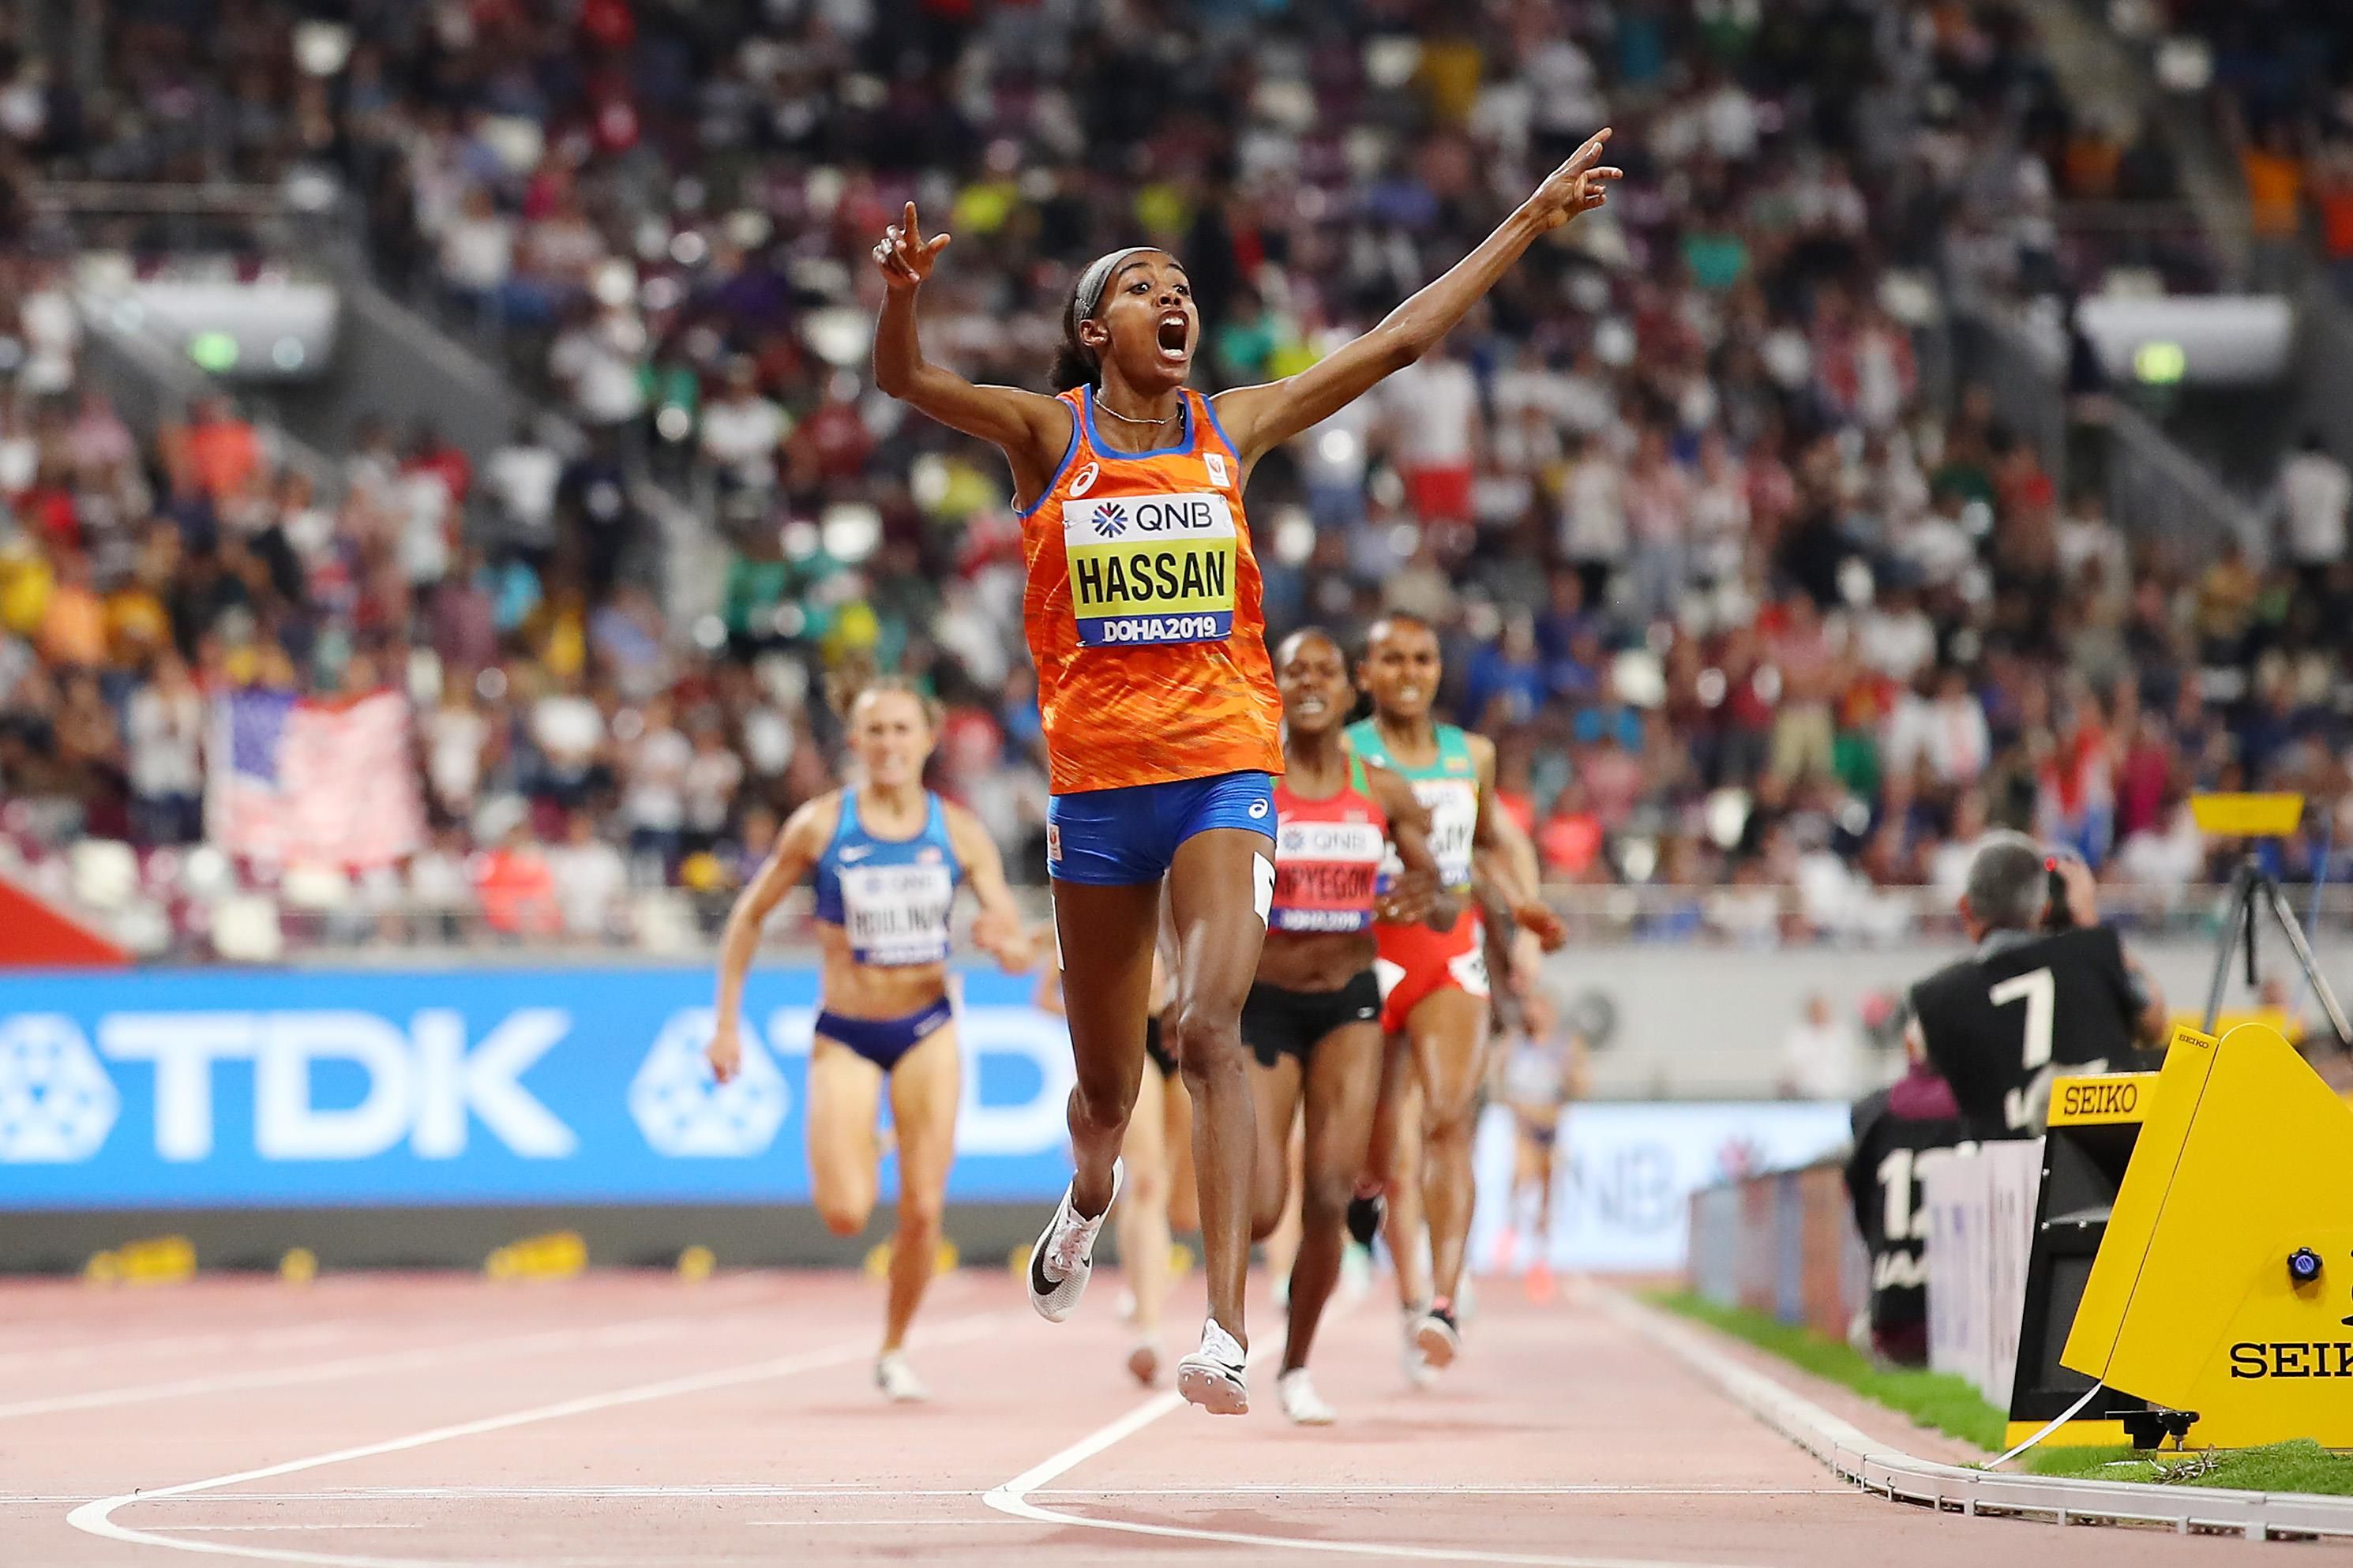 Sifan Hassan takes the 1500m title in Doha - IAAF World Athletics Championships Doha 2019